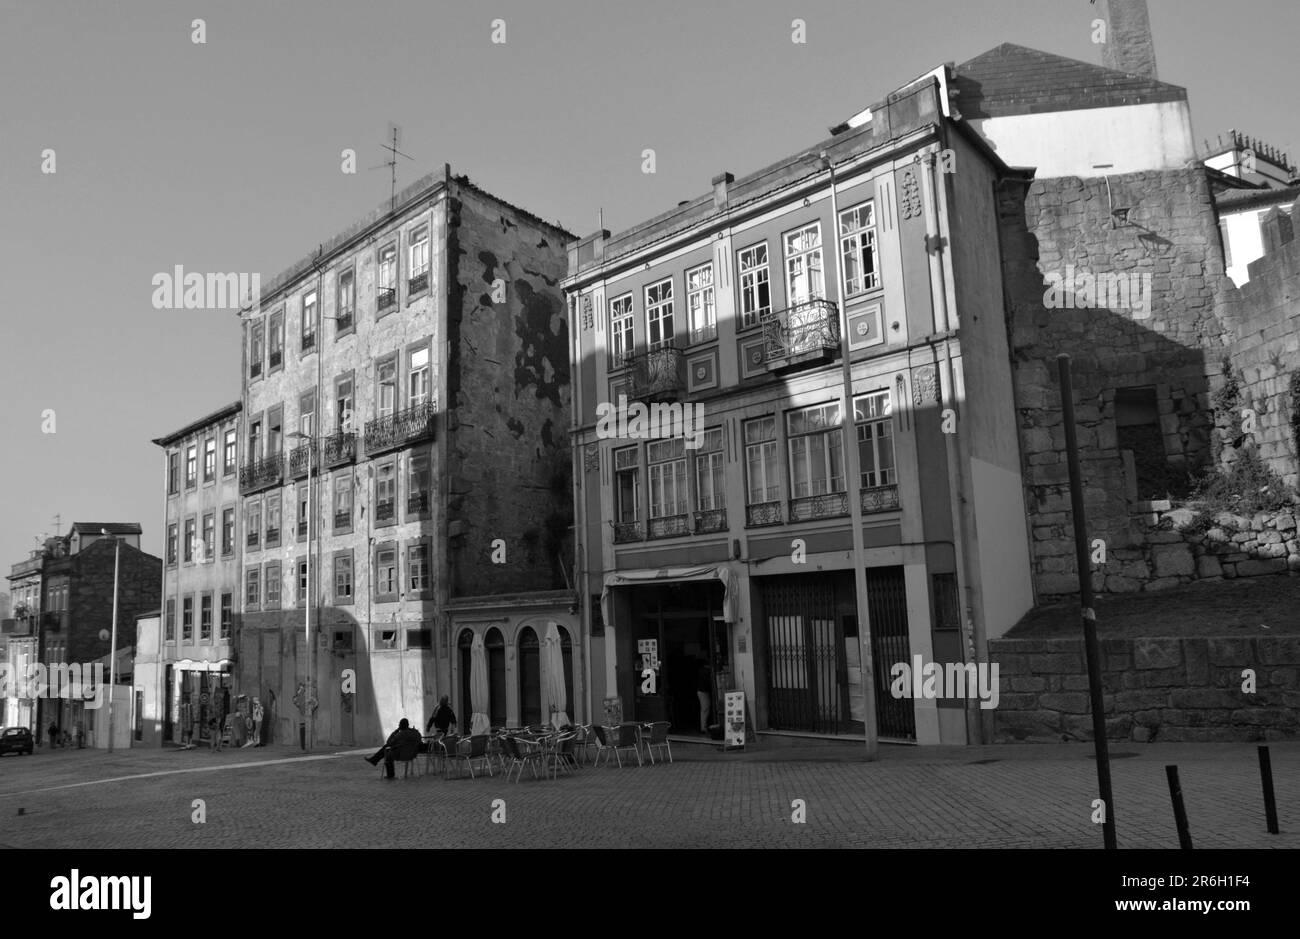 Several facades in Porto City, august 2015 17th. Focus on a small square with a bar, people are drinking coffee. Stock Photo